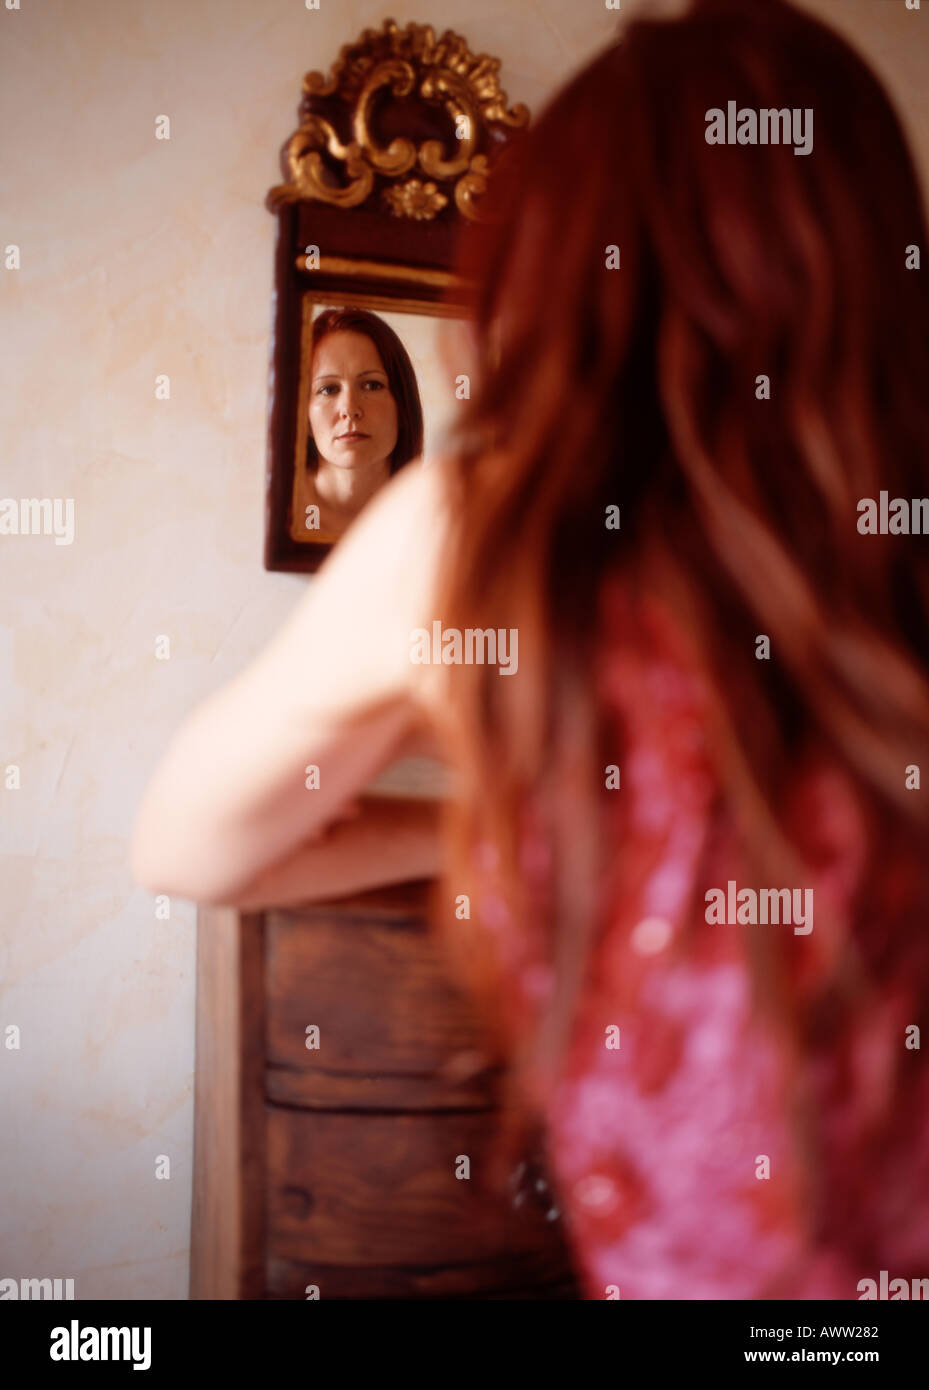 Red haired woman looking in mirror, vue arrière Banque D'Images